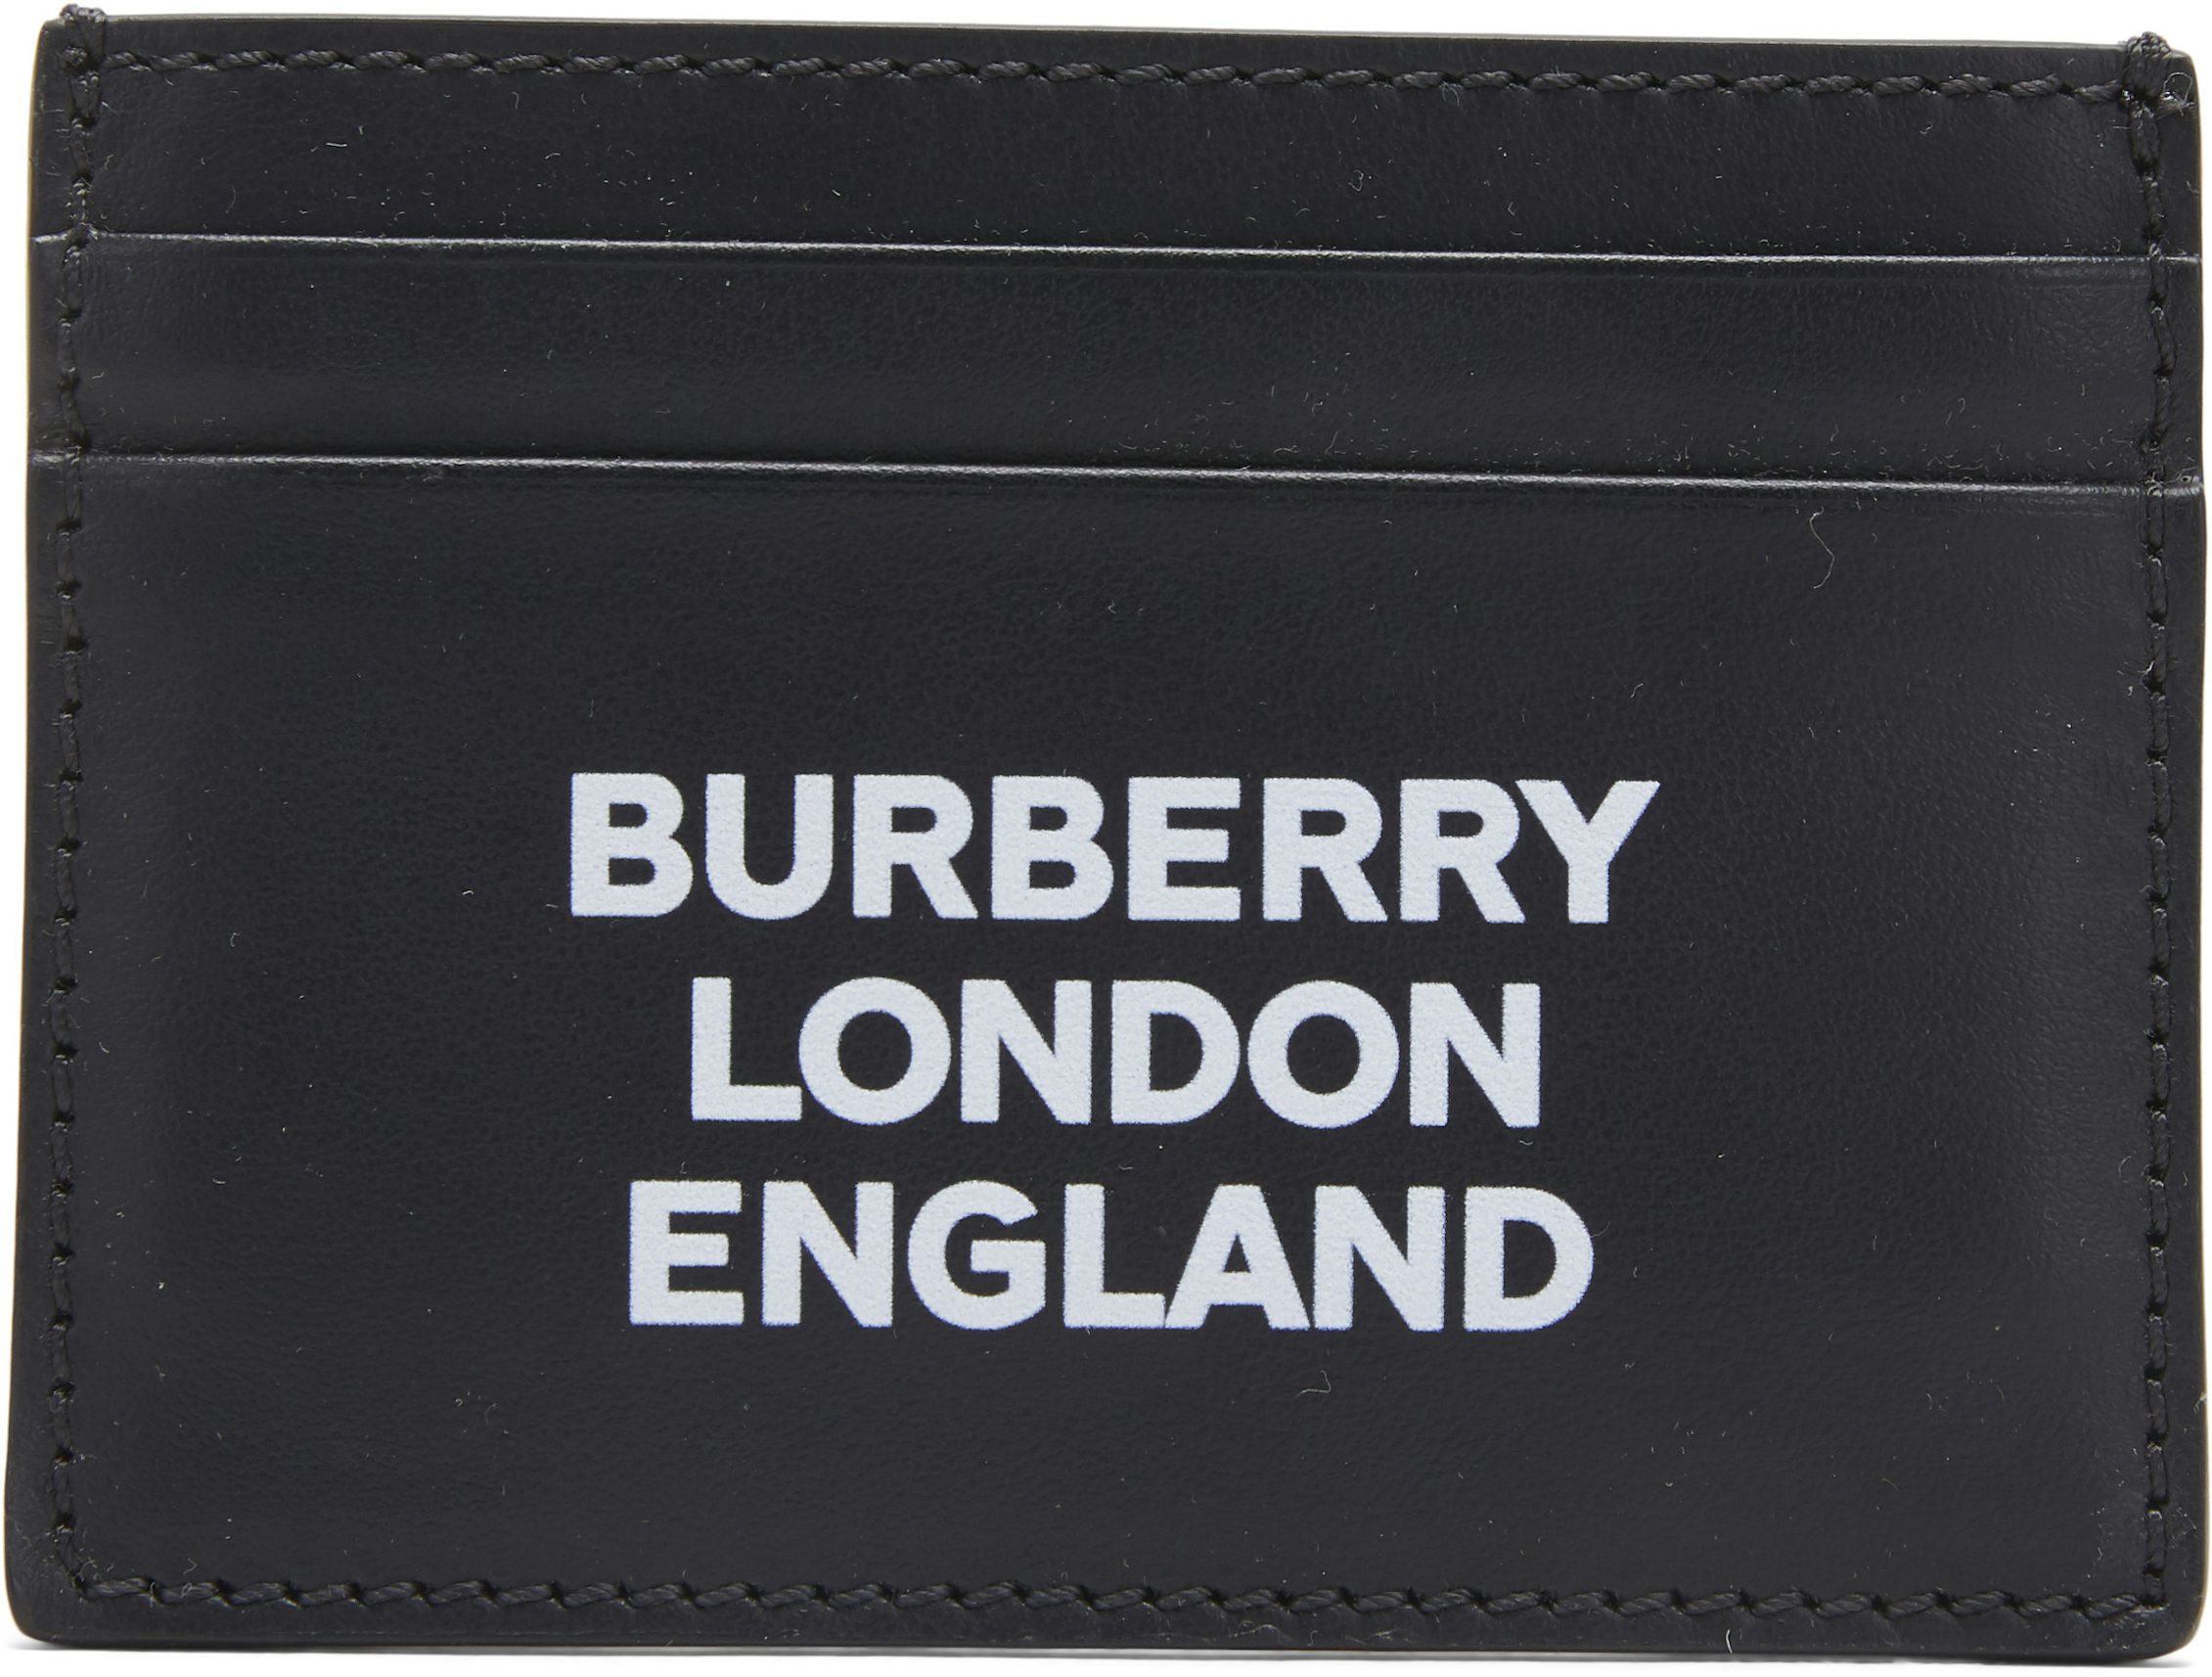 Burberry Vintage Check and Leather Card Case 4 Slot Black in Calfskin - US